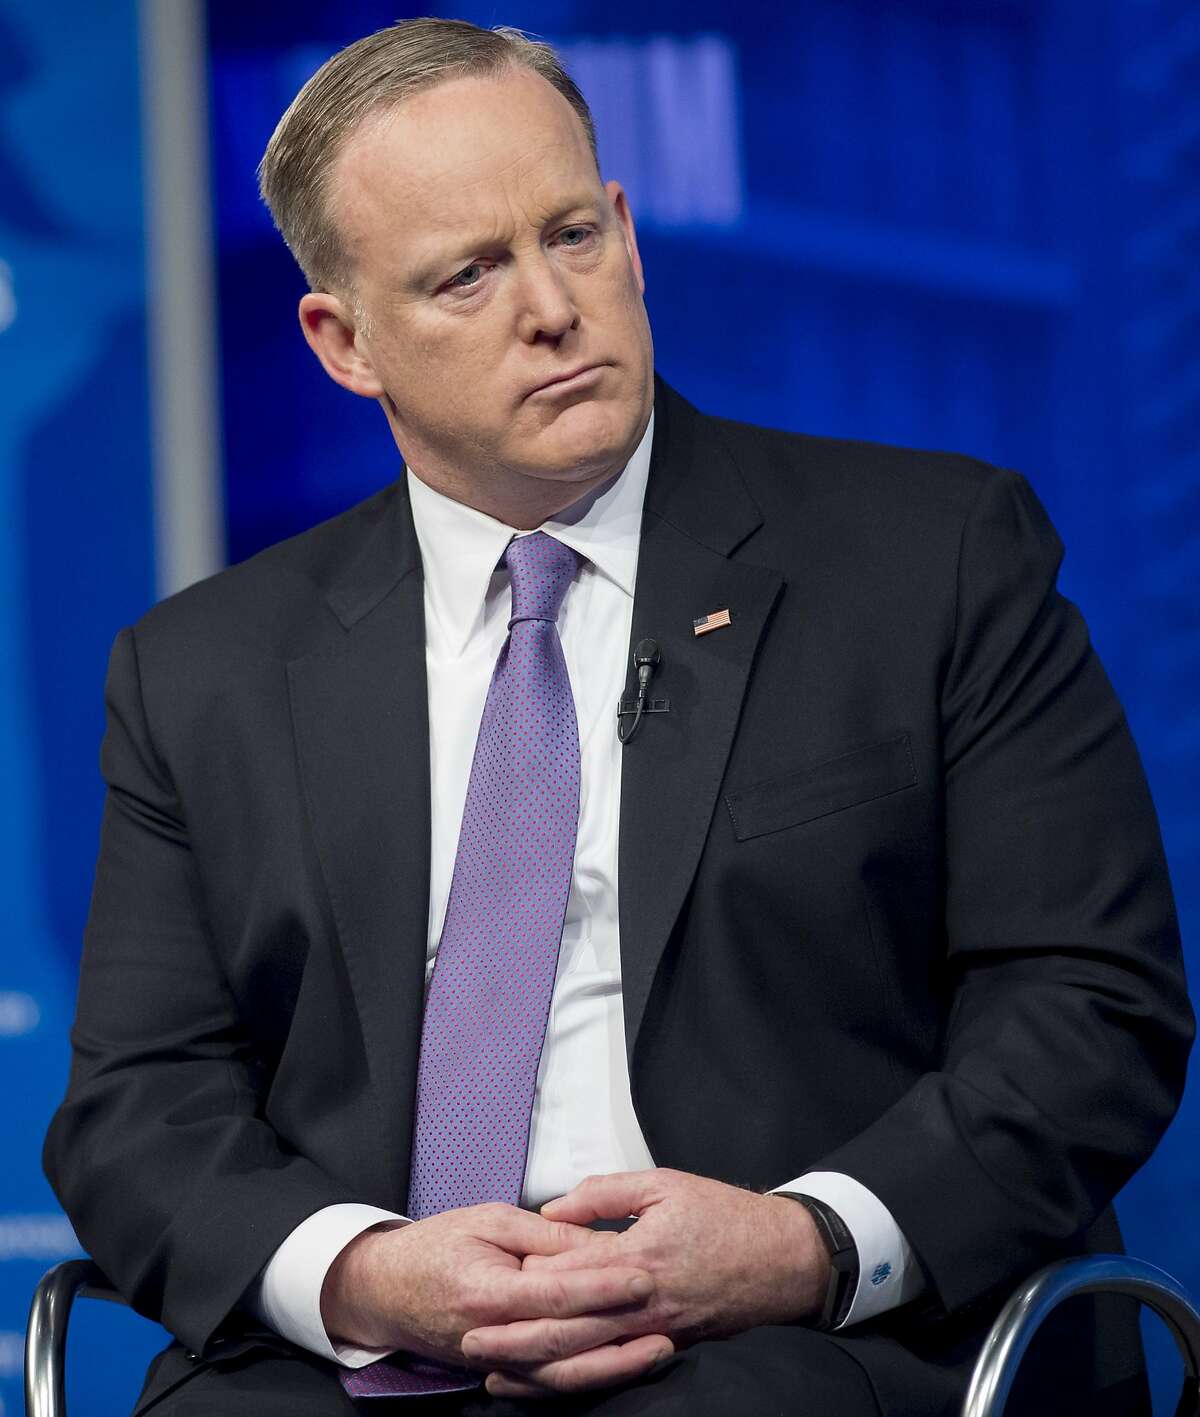 White House Press Secretary Sean Spicer speaks during "The President and the Press: The First Amendment in the First 100 Days" forum at the Newseum in Washington, DC, April 12, 2017. / AFP PHOTO / SAUL LOEBSAUL LOEB/AFP/Getty Images